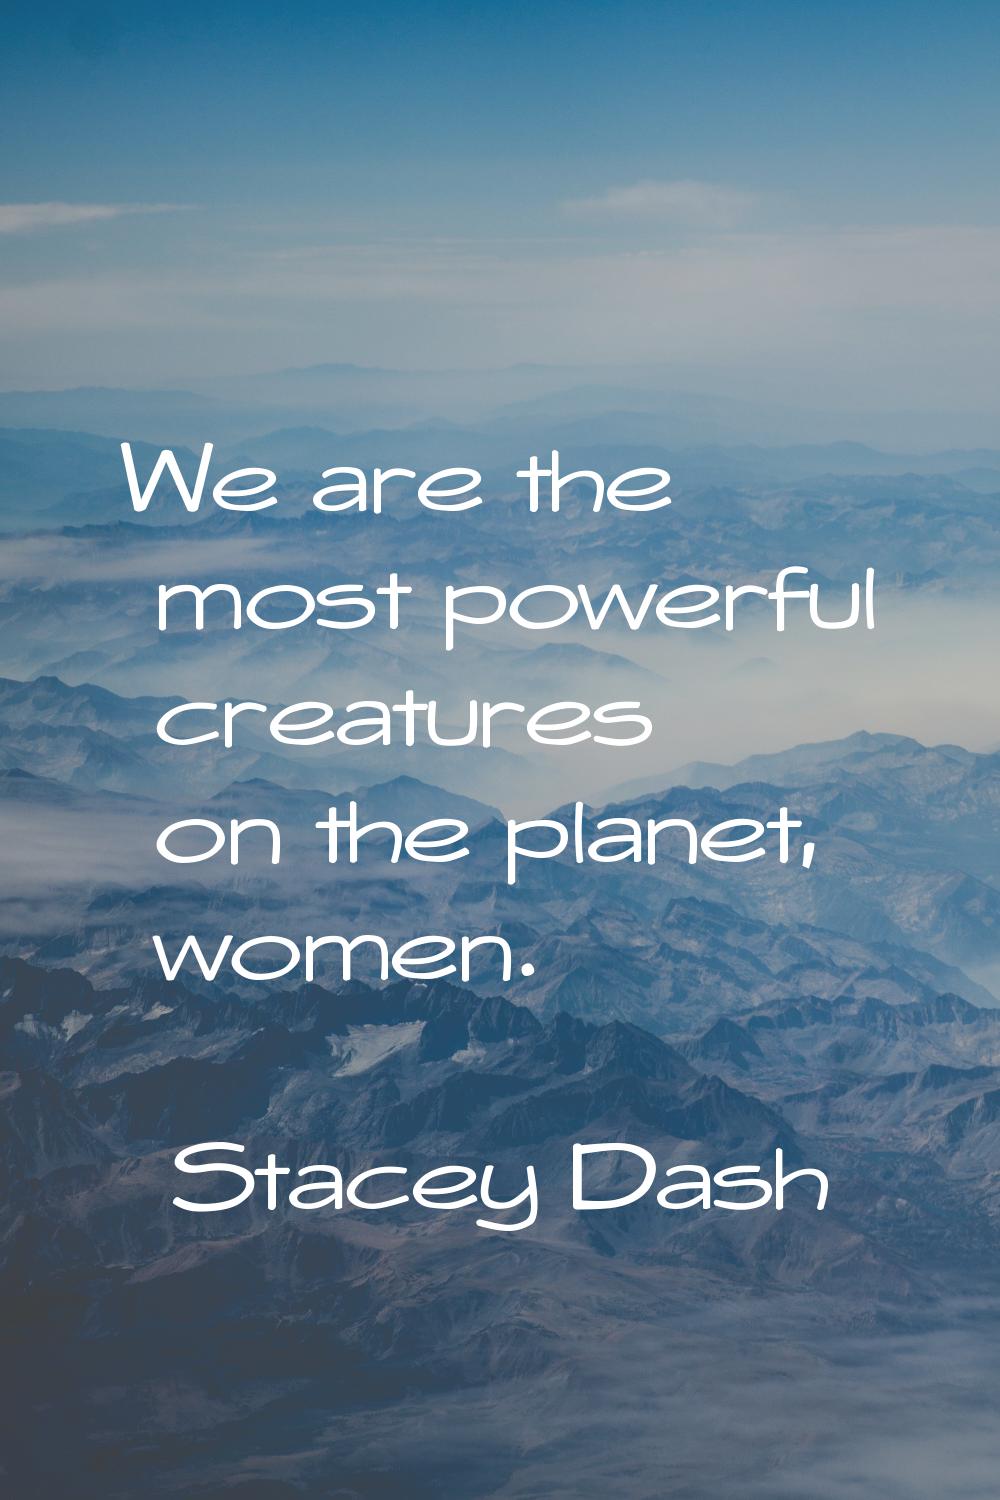 We are the most powerful creatures on the planet, women.